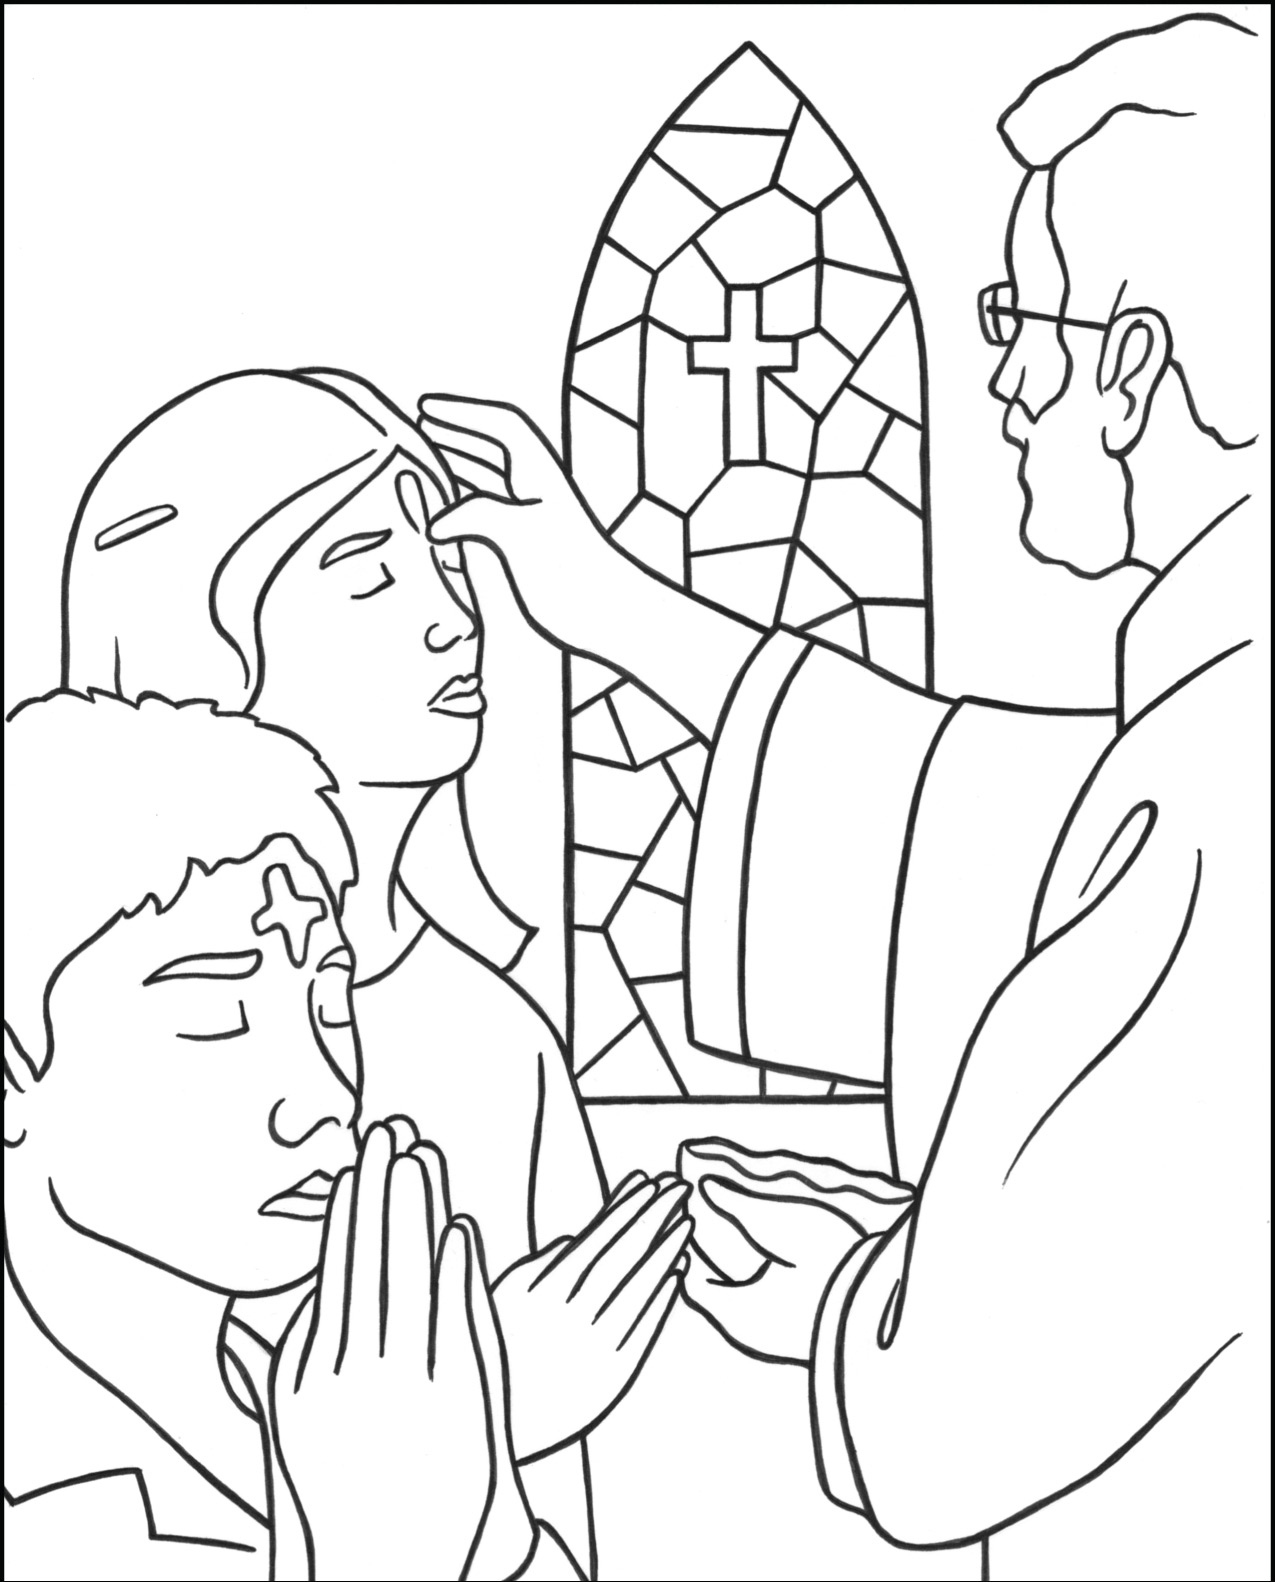 Wednesday Printable Coloring Pages - Printable World Holiday